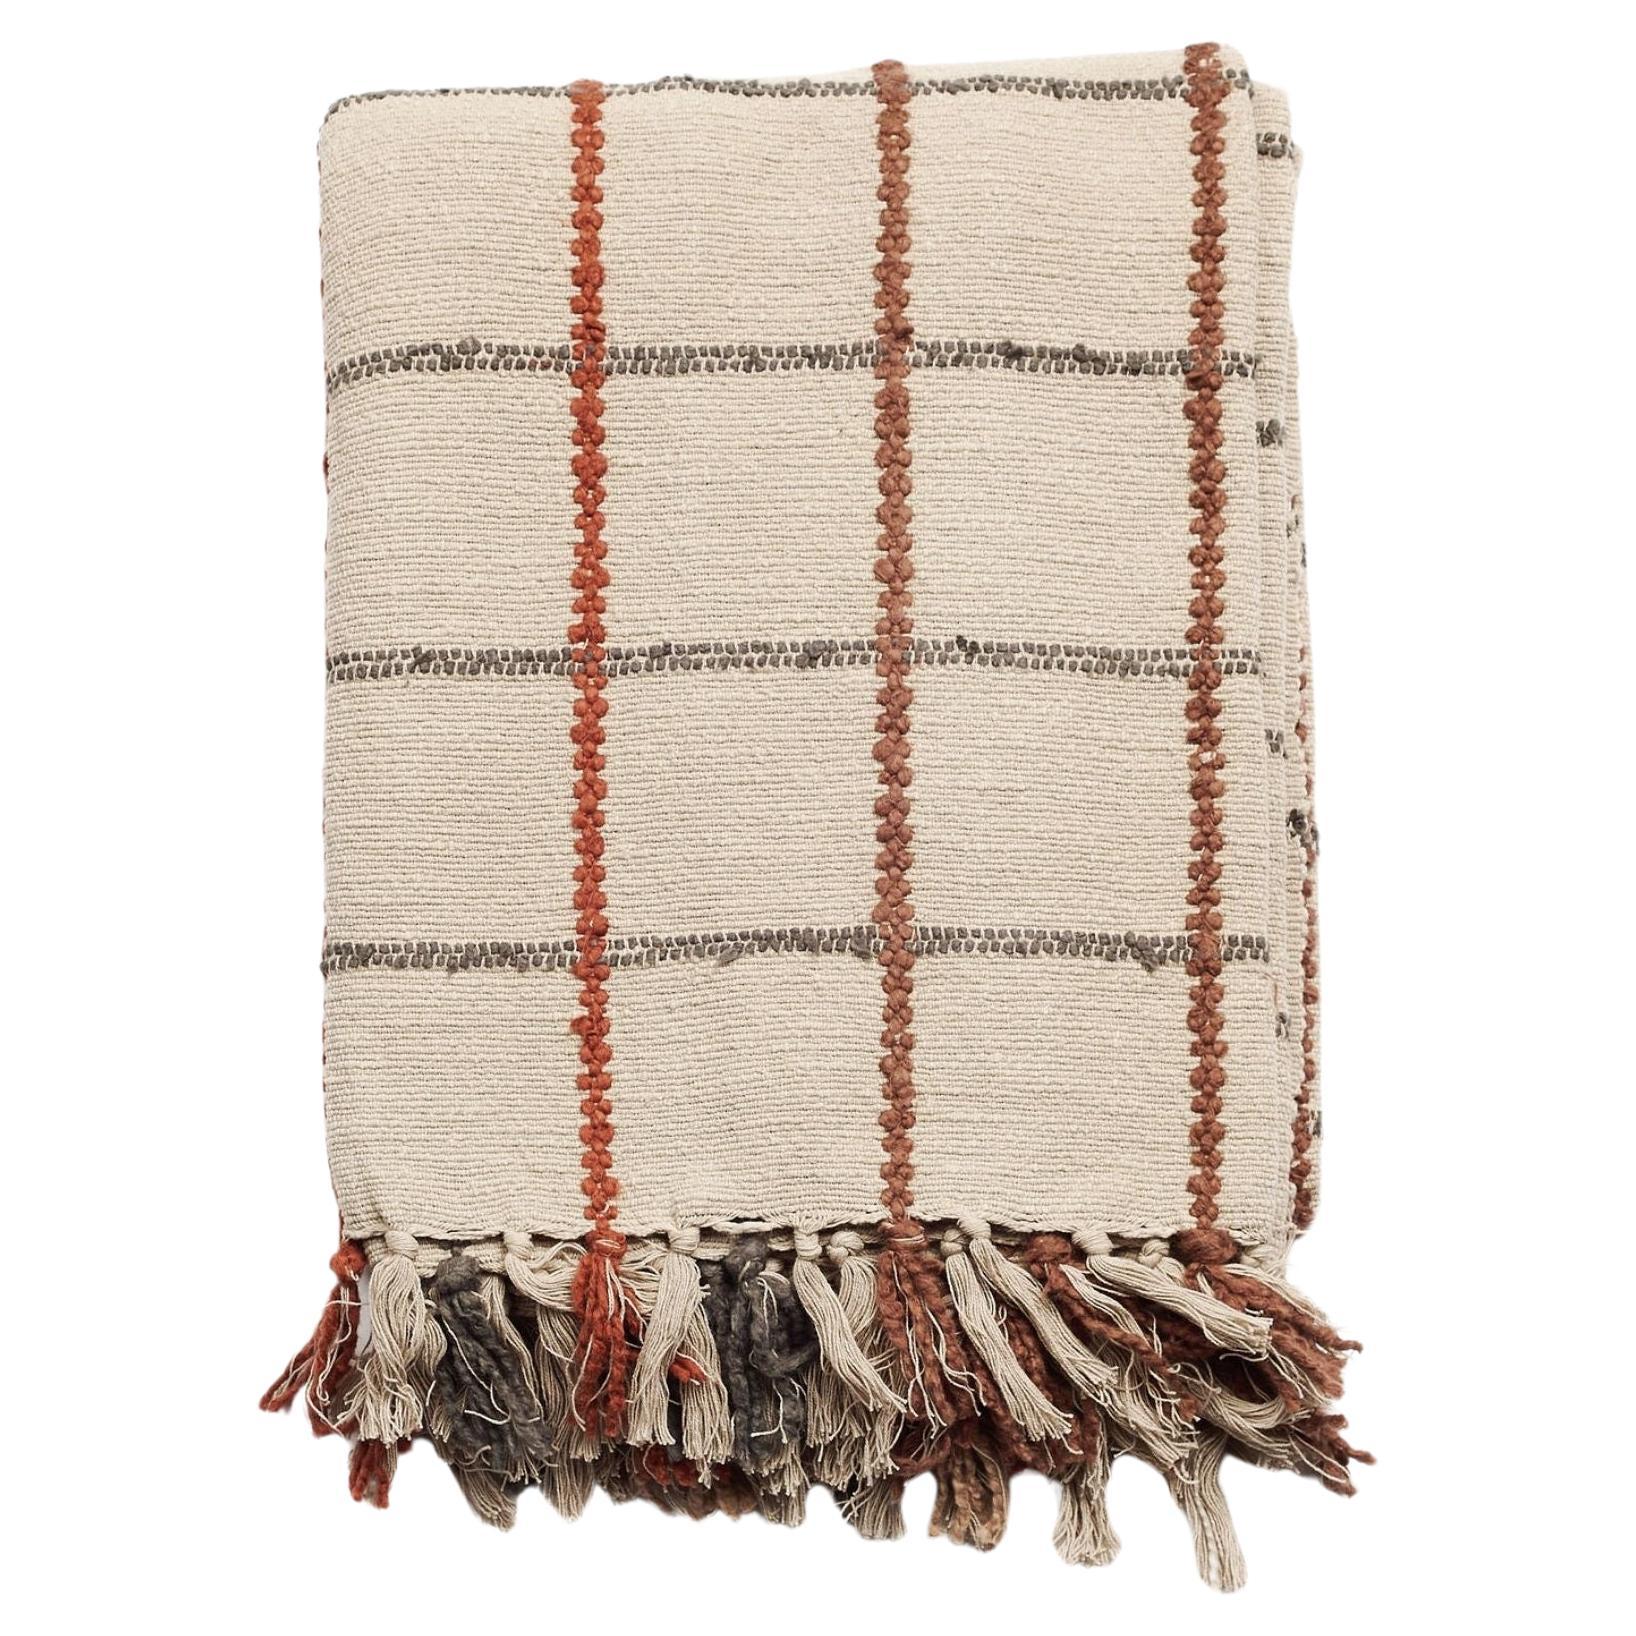 Clay Handloom Checks Textured Weave Pure Cotton Weighted Throw / Bedspread For Sale